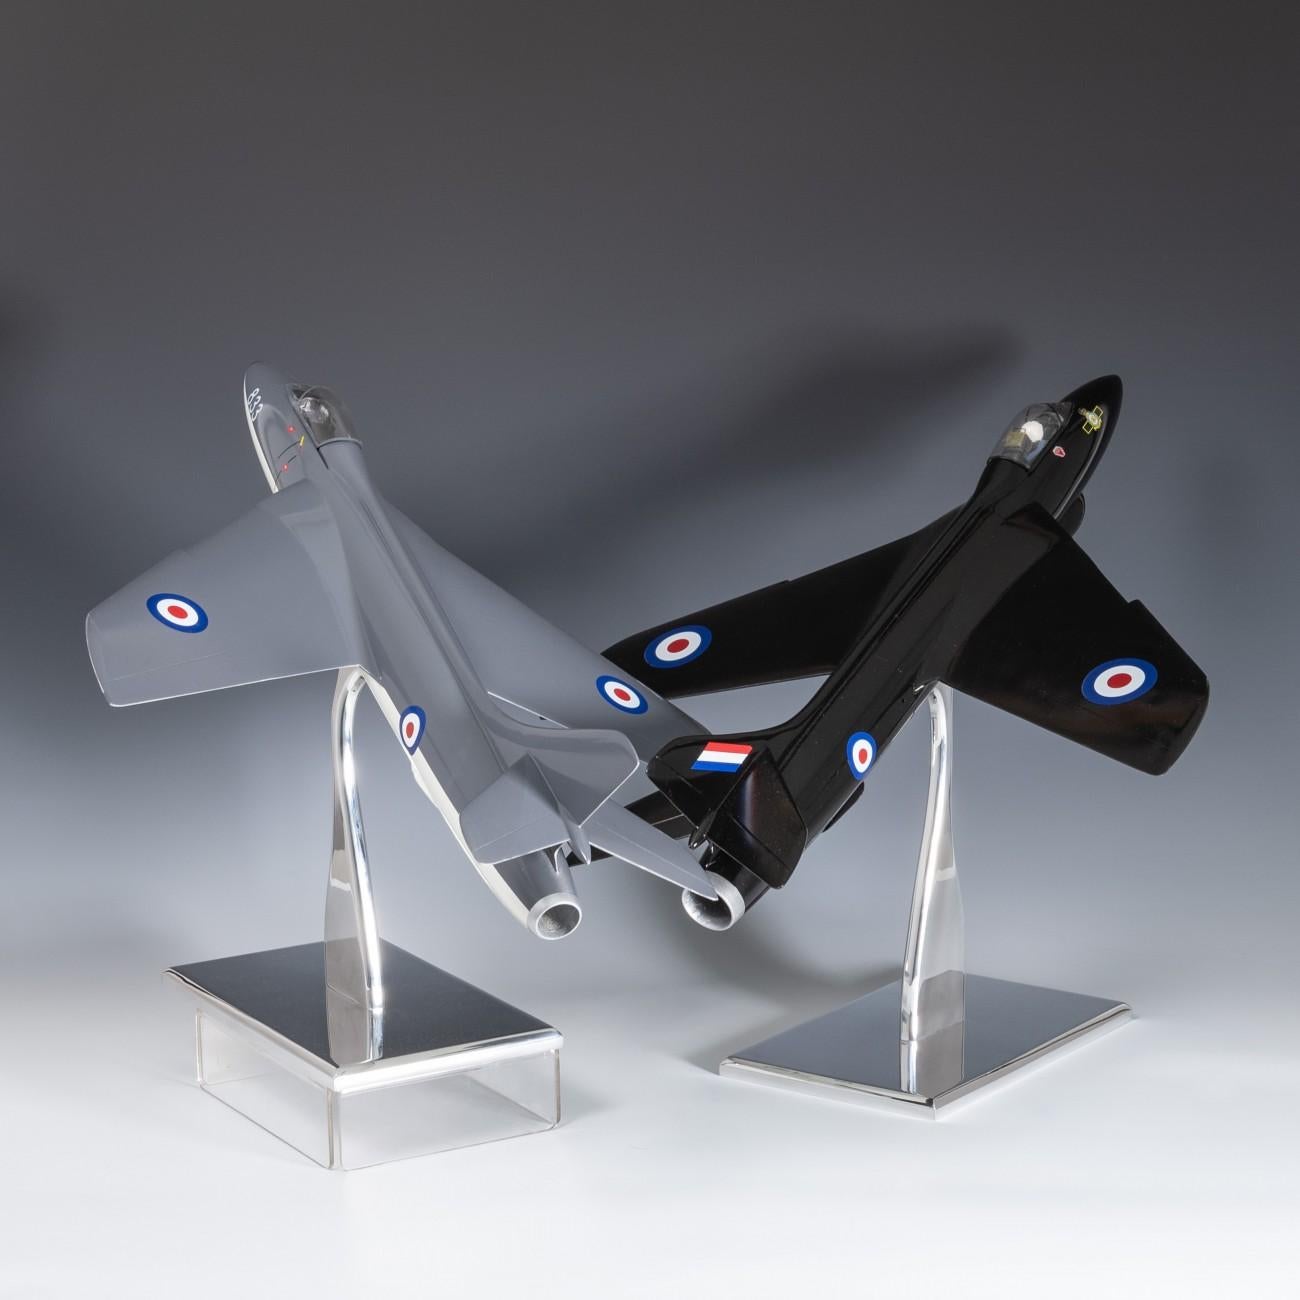 Wonderful pair of 1950s-1960s carved wooden scale models of the Hawker Hunter fighter jet. These models had lost their stands and were generally in a poor decorative state when we found them so have been re-painted and mounted on newly made polished